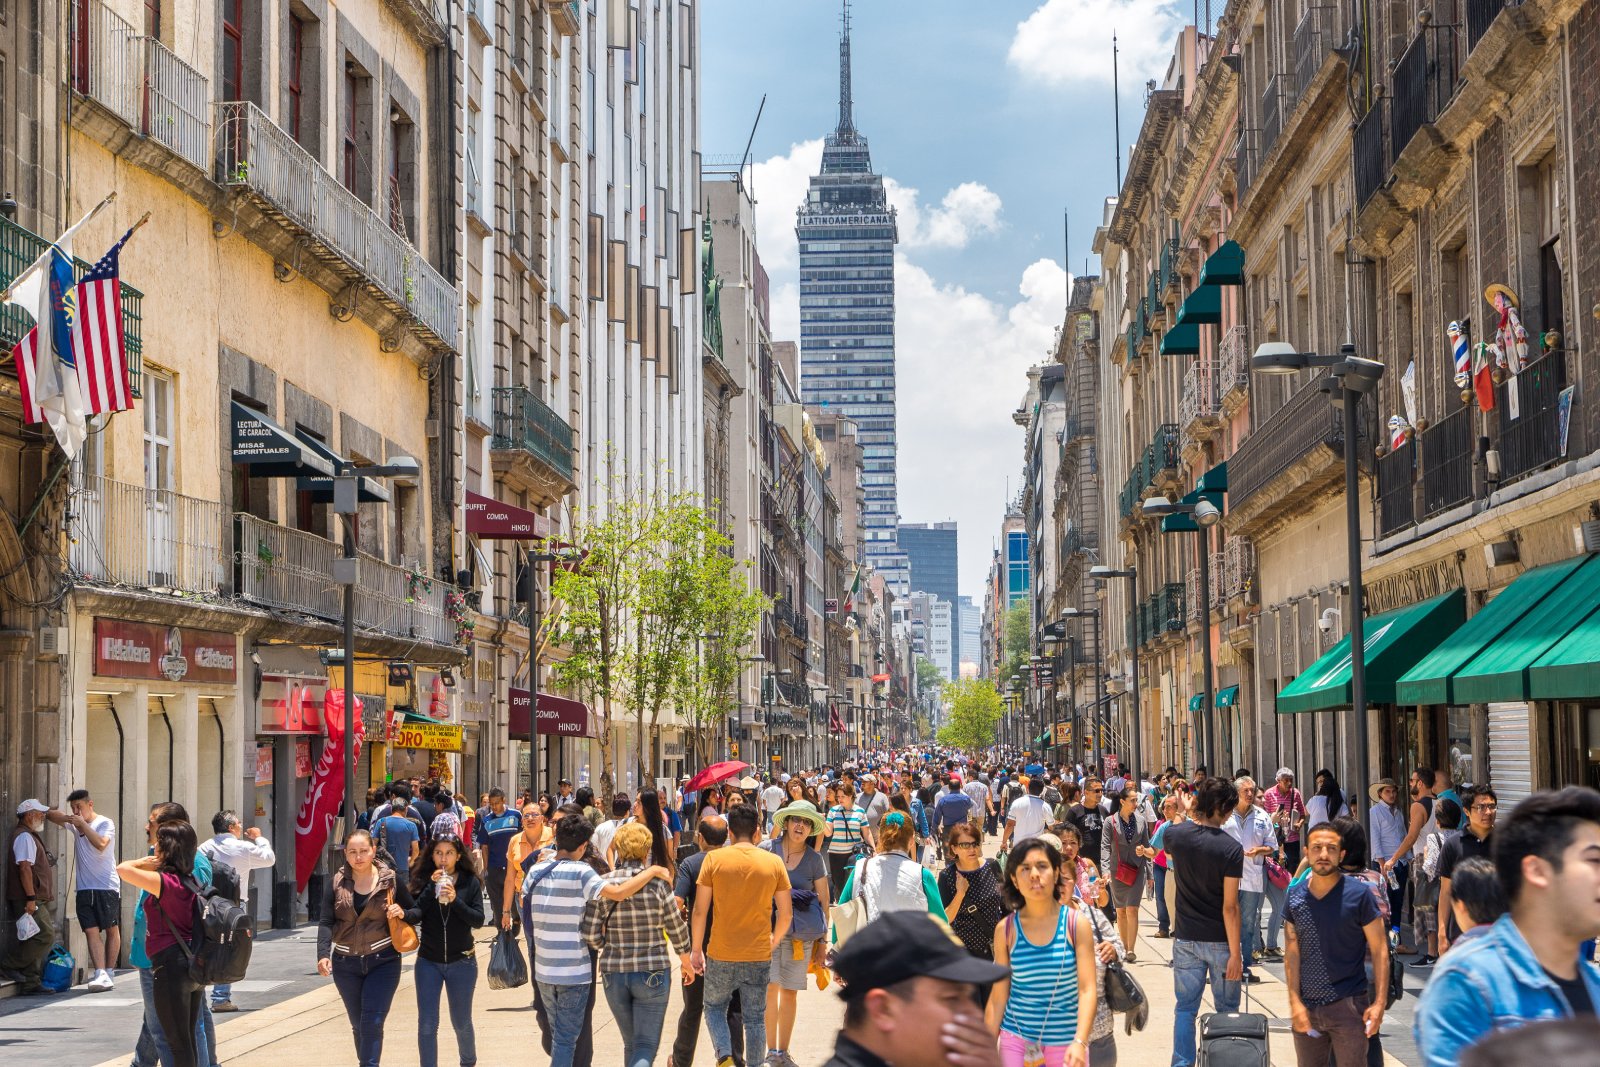 <p><span>U.S. emigration south of the border has soared in the last decade, with Mexico becoming the top destination for Americans to move to. </span></p><p><span>According to Bloomberg analysis, U.S. emigration rates to Mexico jumped by 85% between 2019 and 2022, reaching a record number of residents in the country.</span></p>